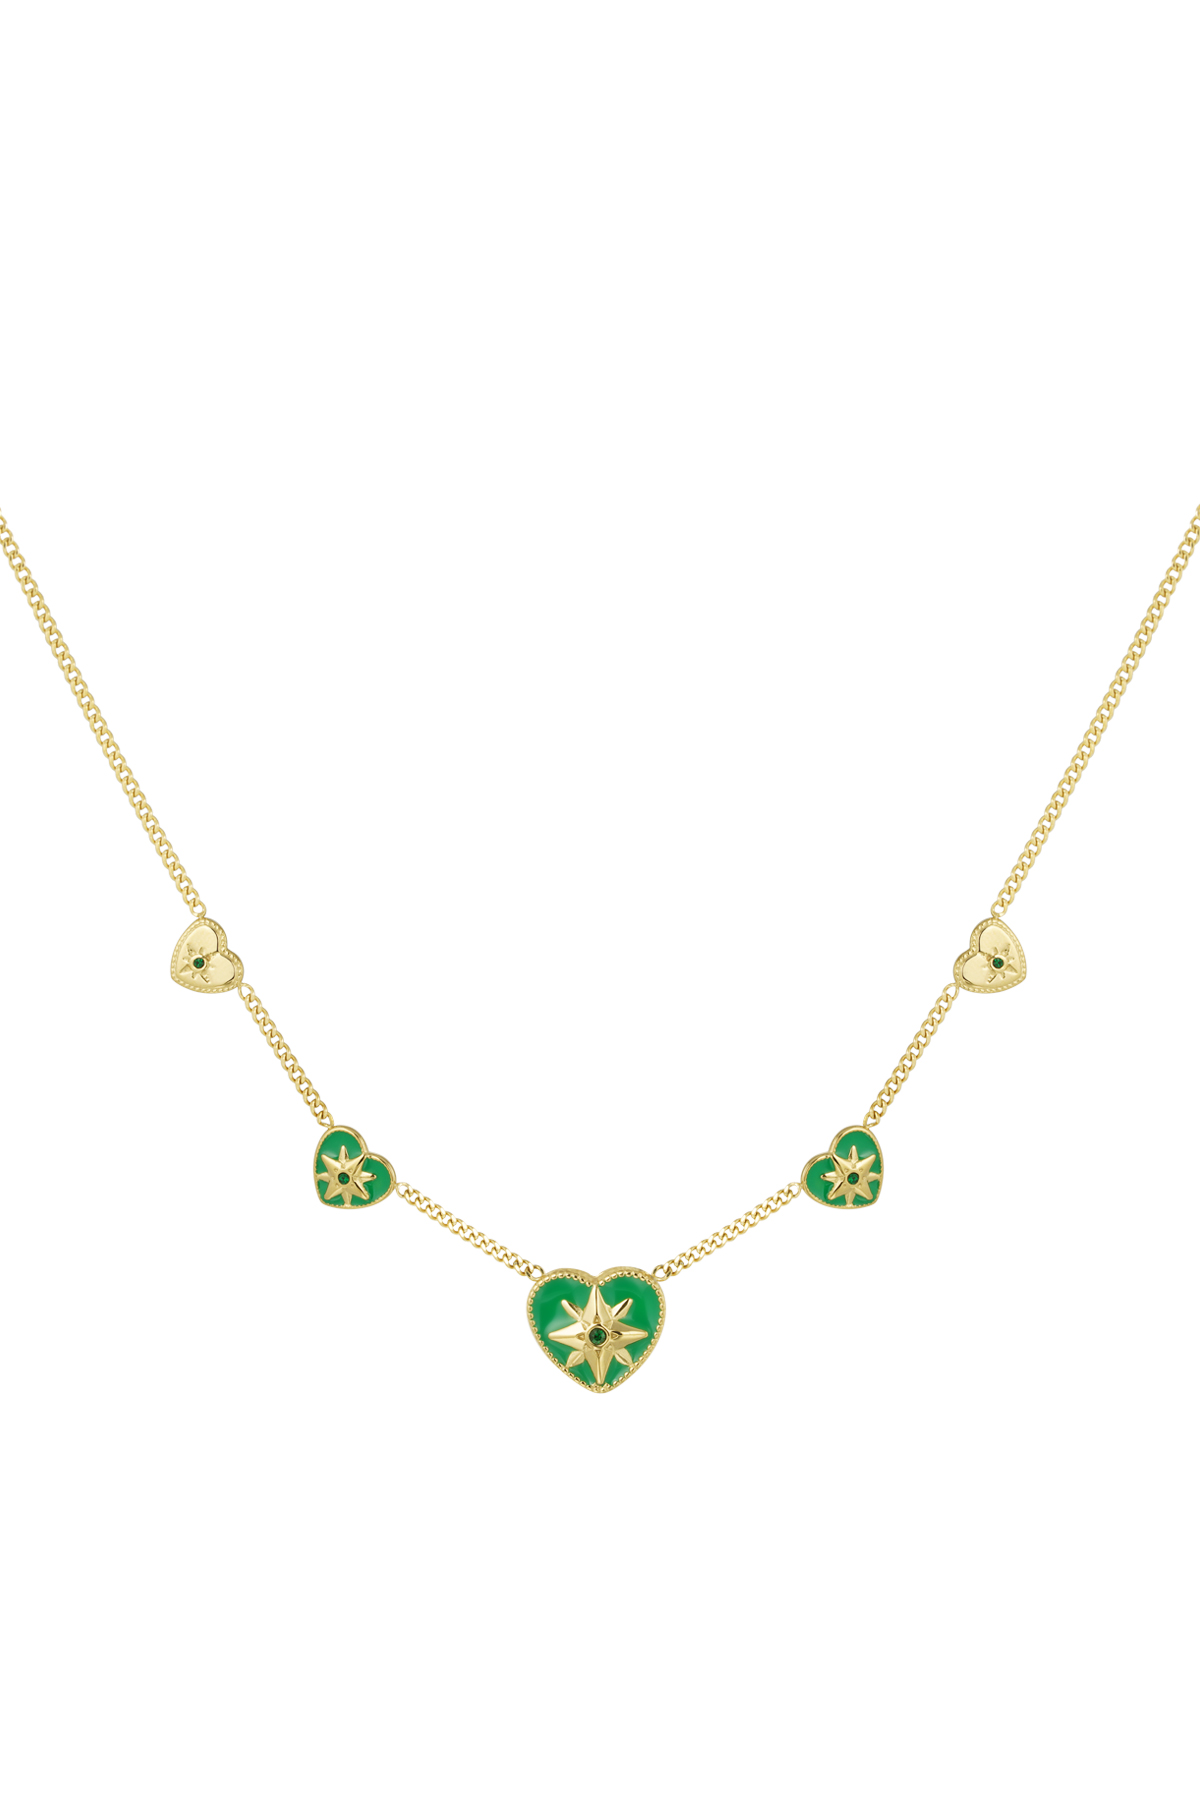 Necklace 5 hearts green - gold